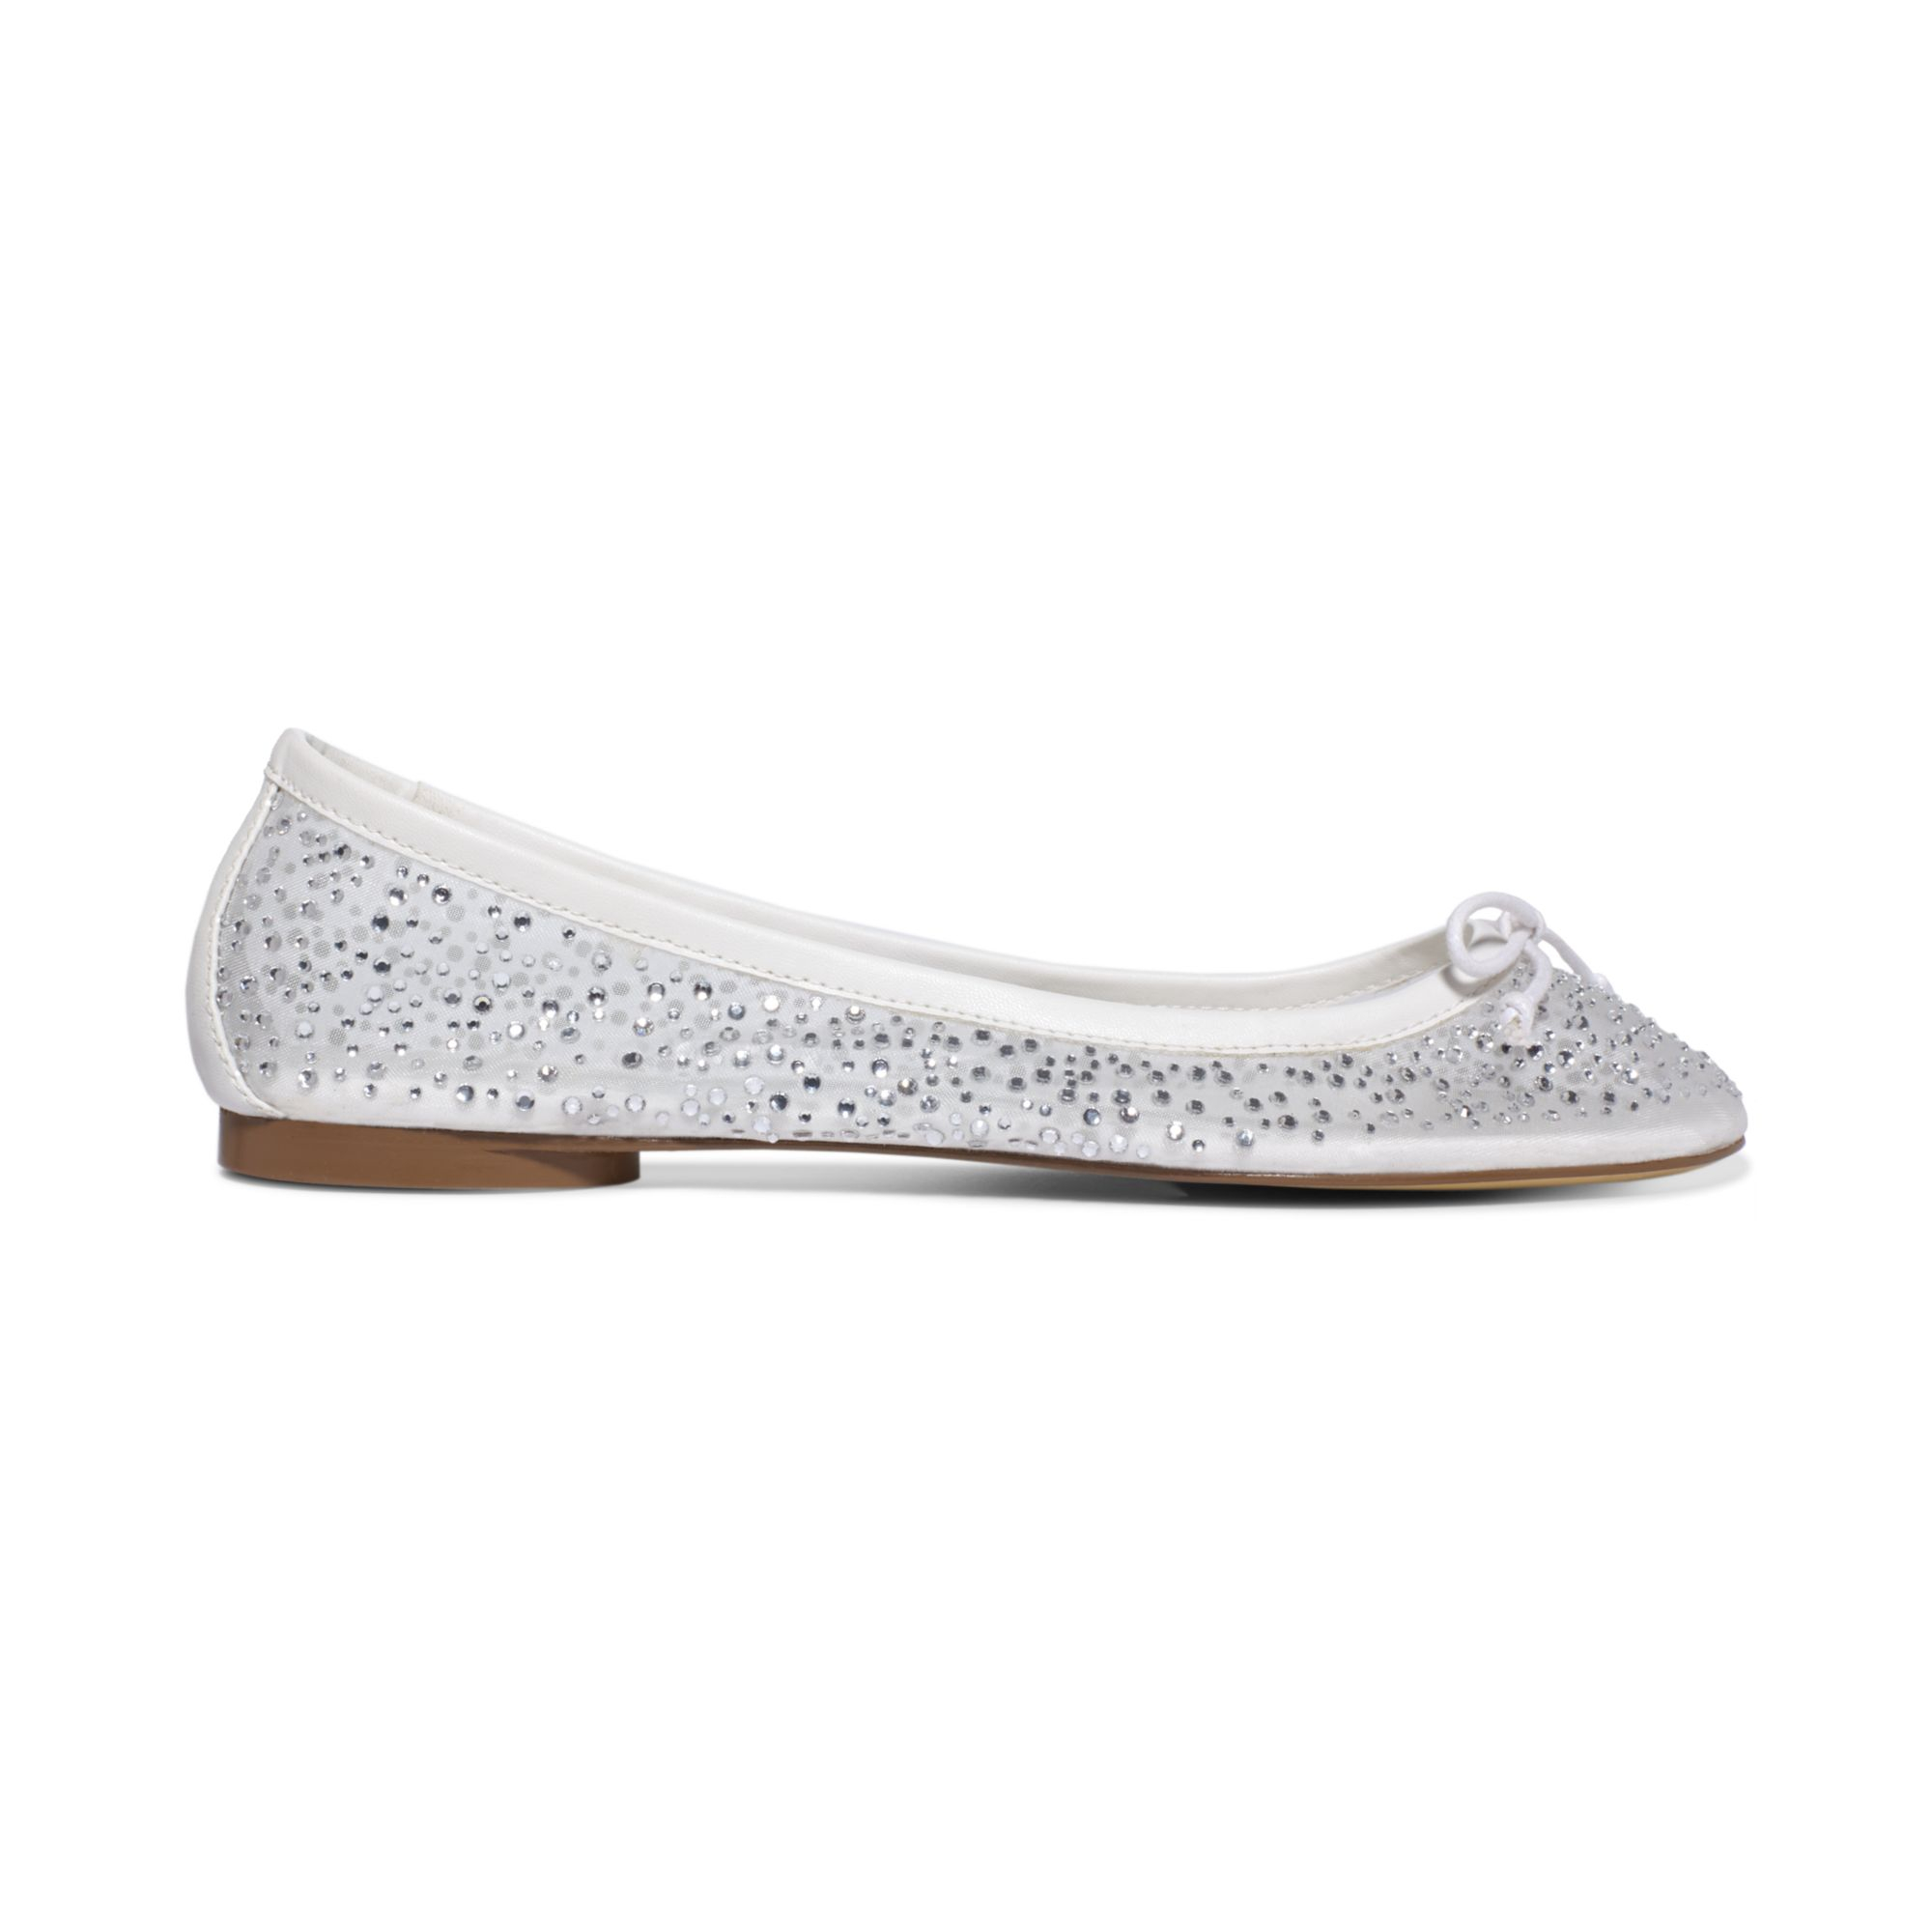 Adrianna Papell Selina Evening Ballet Flats in Ecru (White) - Lyst